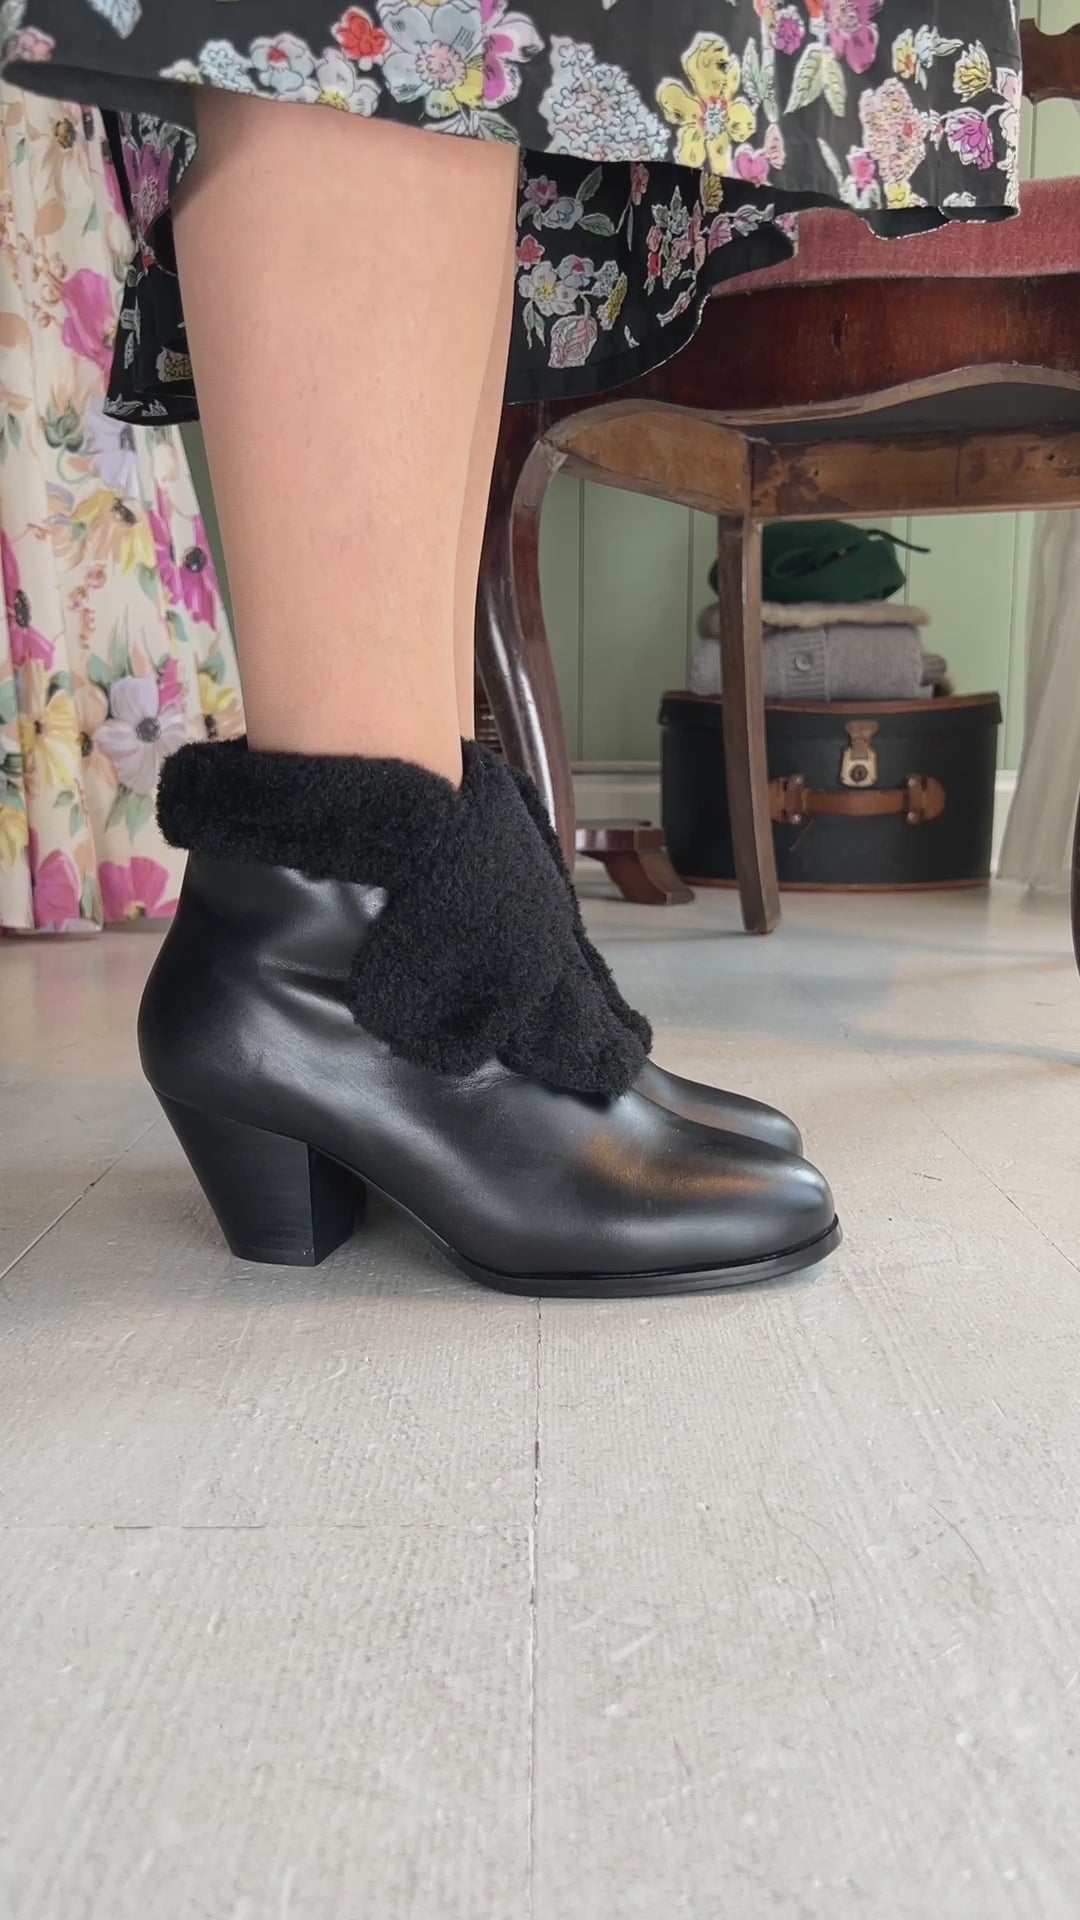 50s style pump booties with wool - Black - Maria